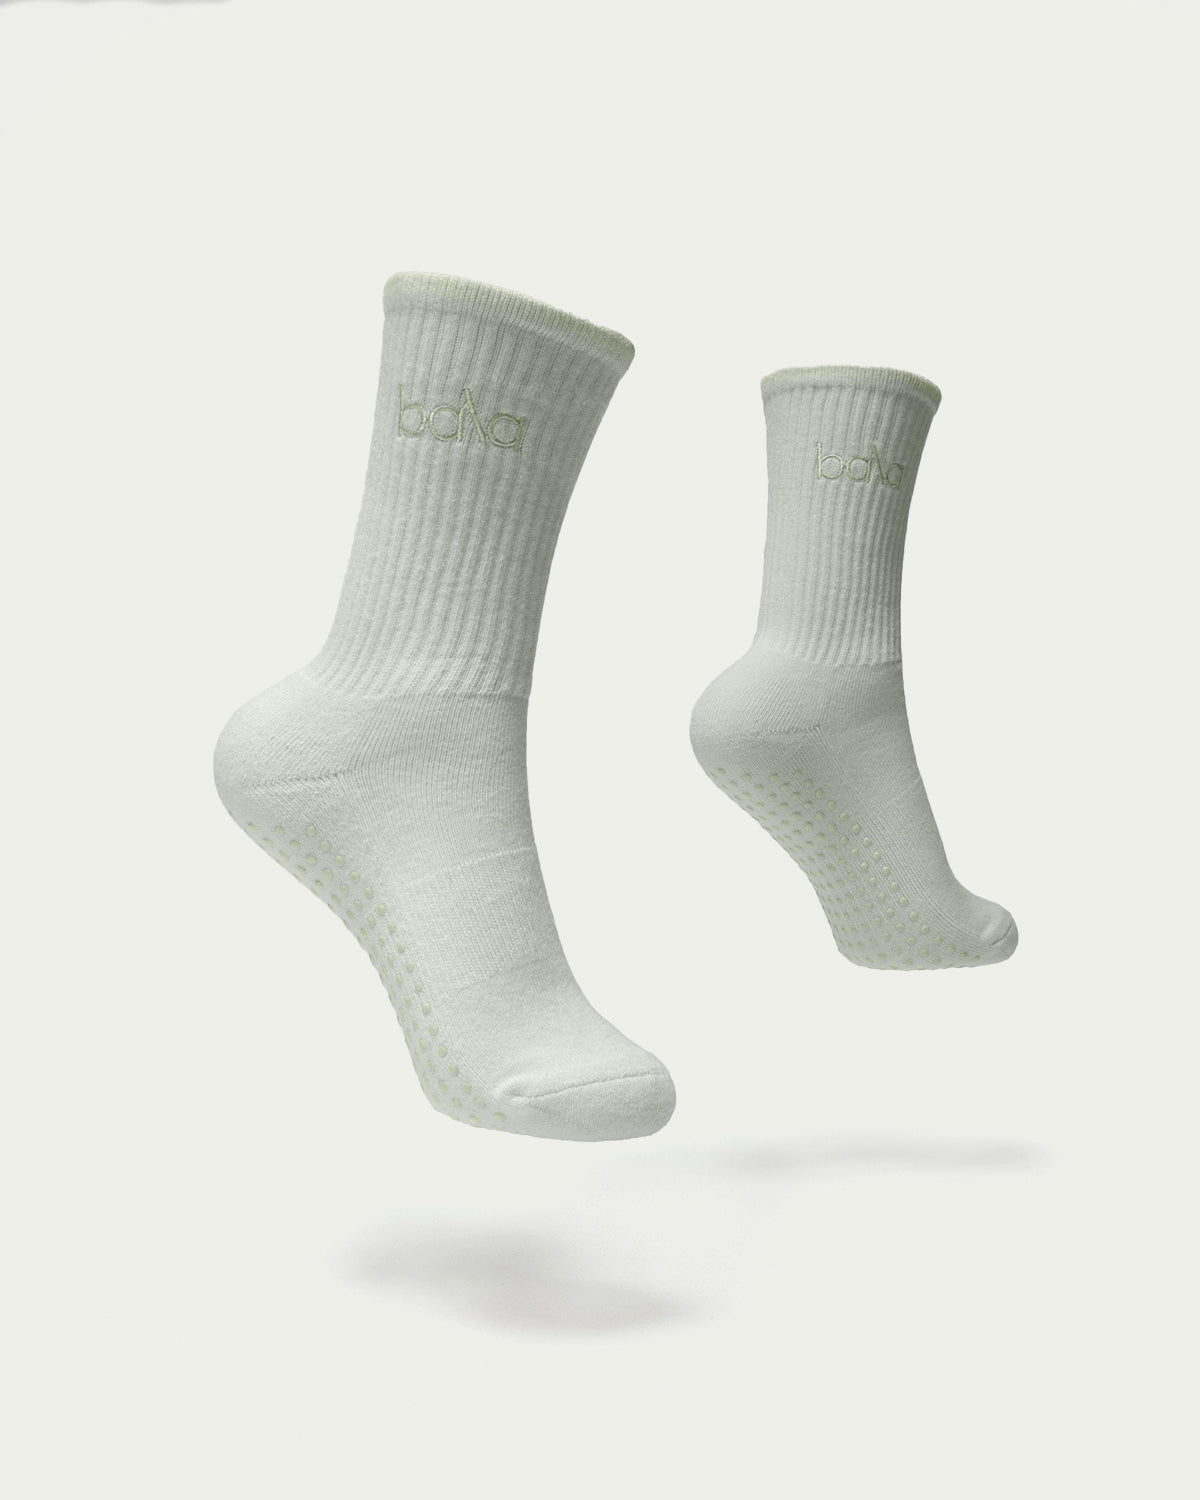 High Performance Grip Socks - Limited Edition (3 Pack) – PLAY Performance